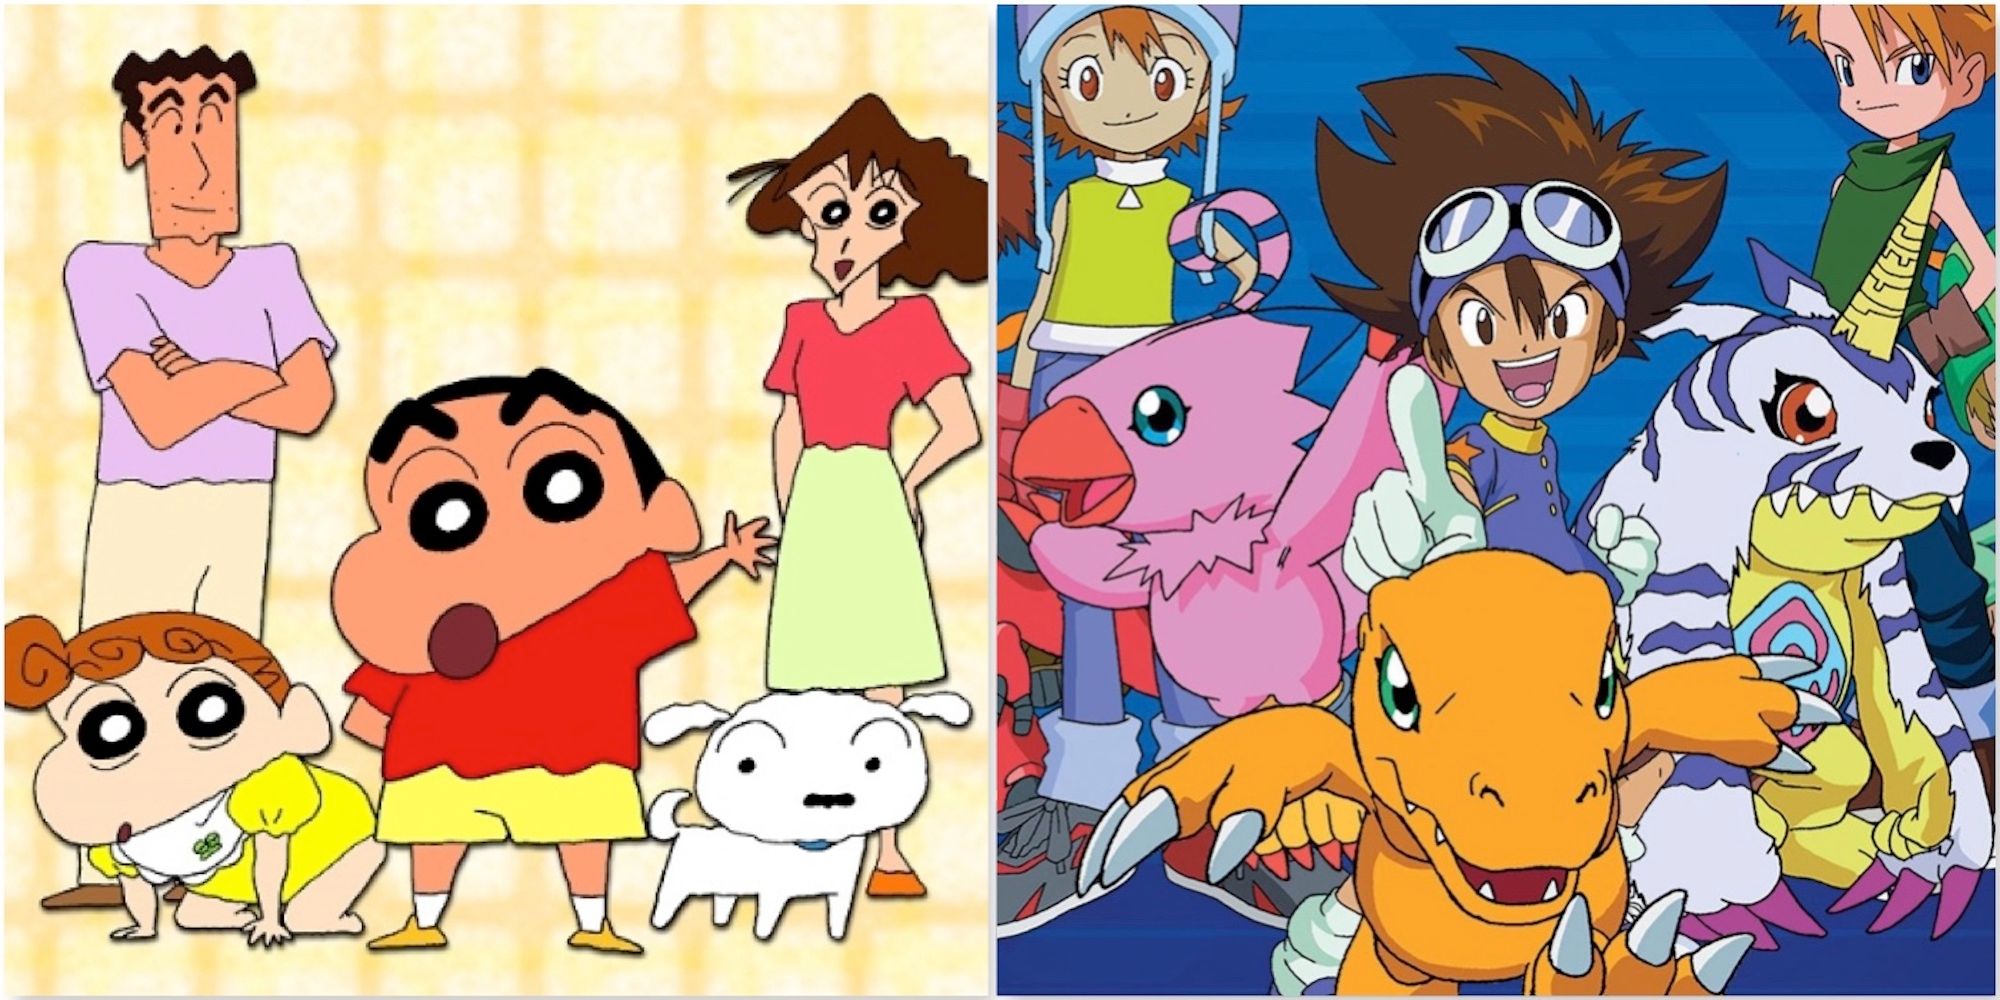 Shin Chan and his family from Shin Chan and promo art featuring the cast from Digimon Adventure